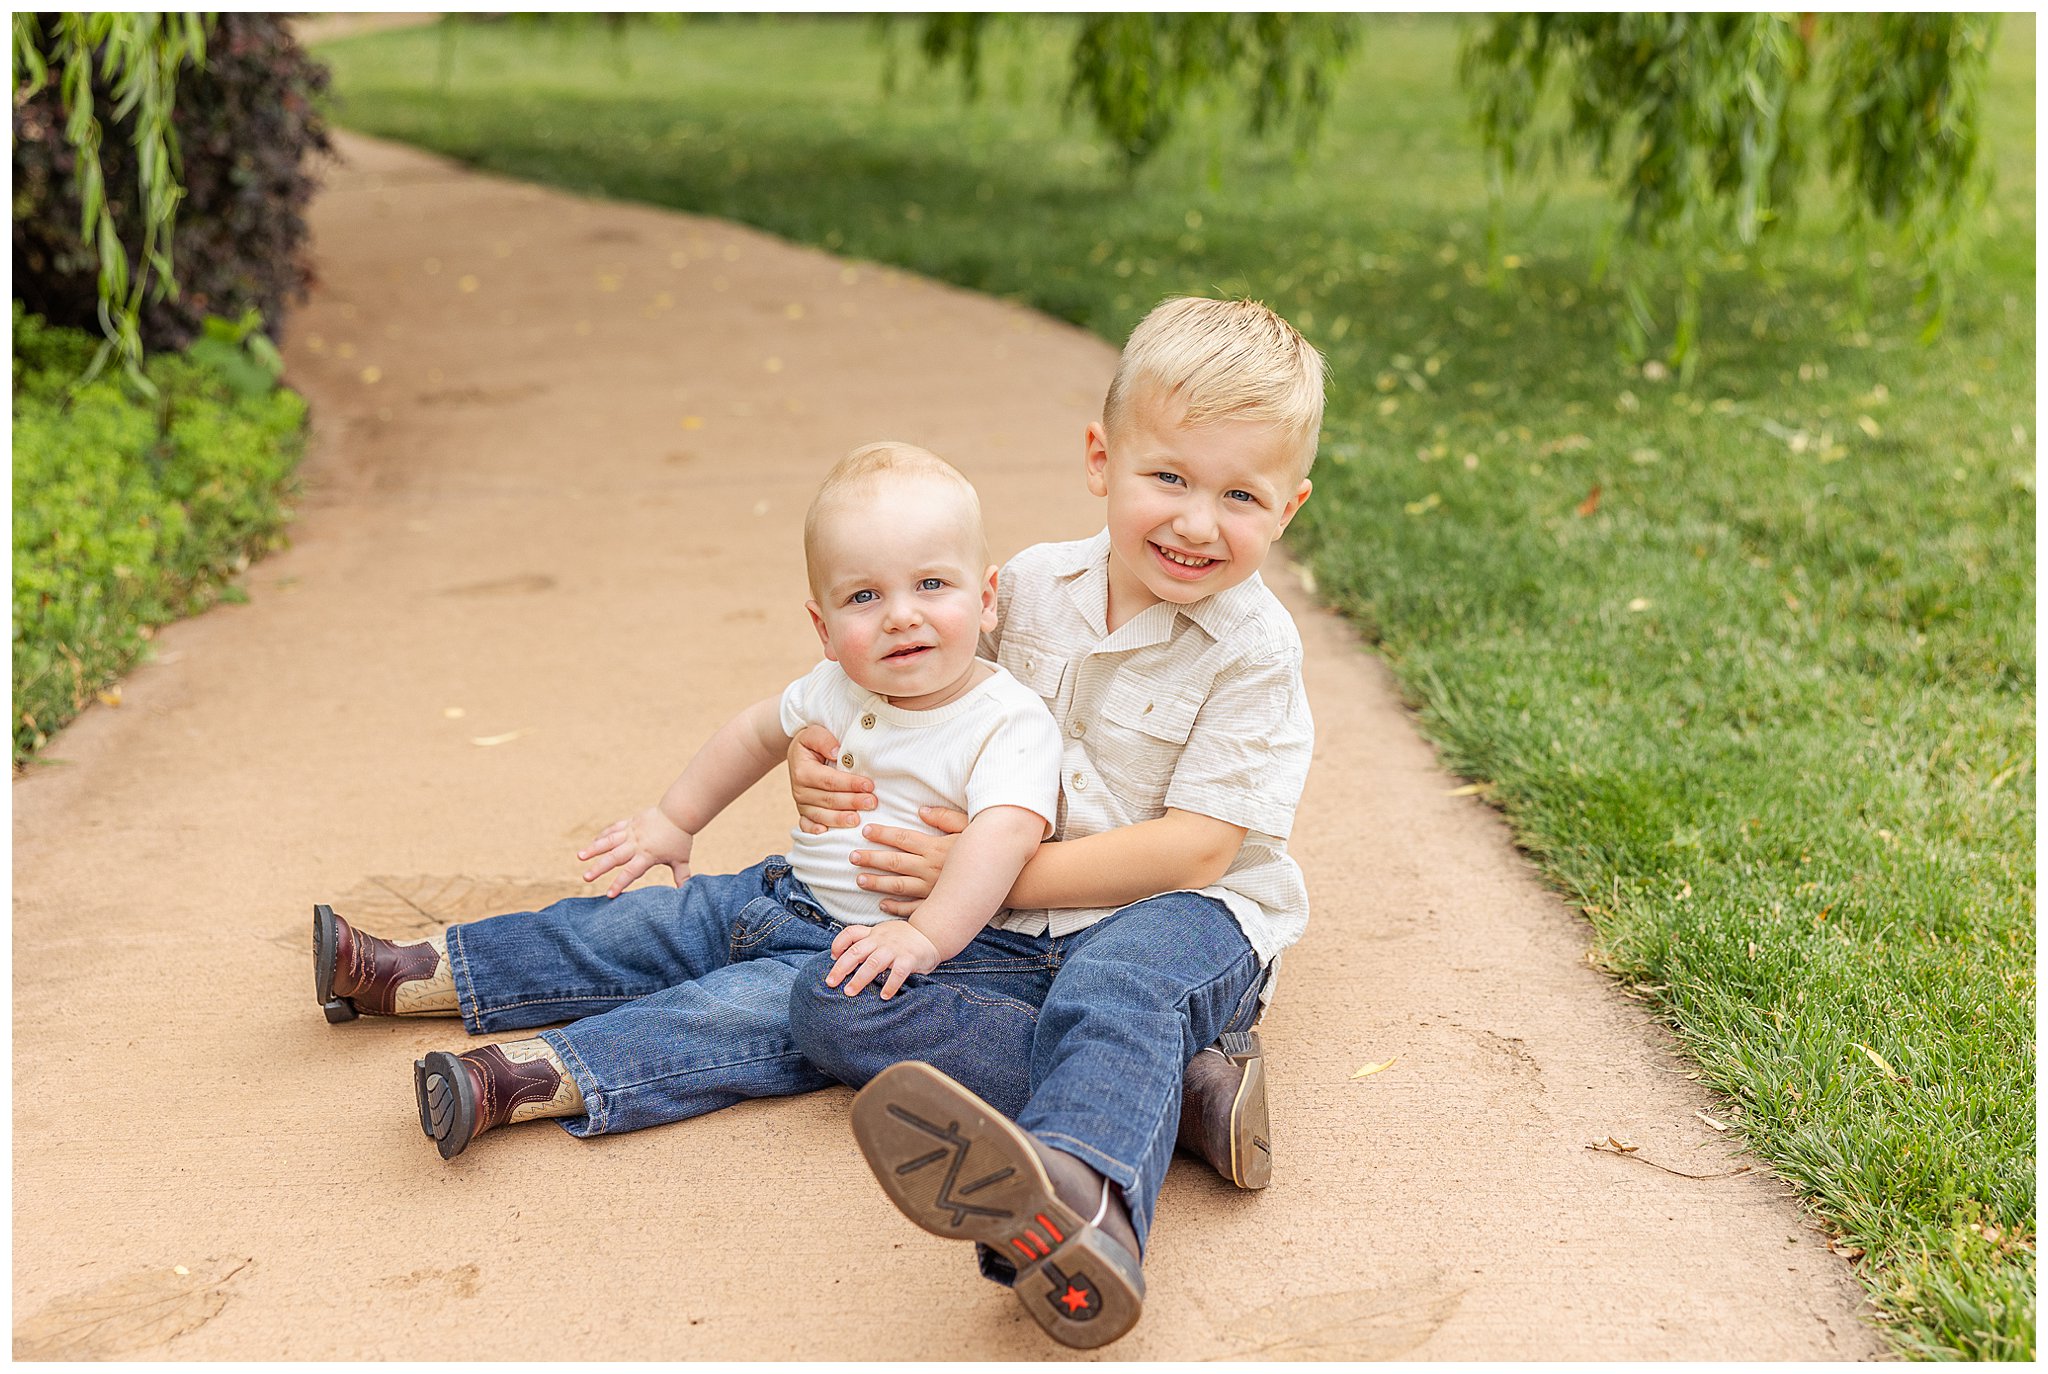 White Ranch Event Family Session Chico CA Spring May Willow Tree Brothers Boy Mom,